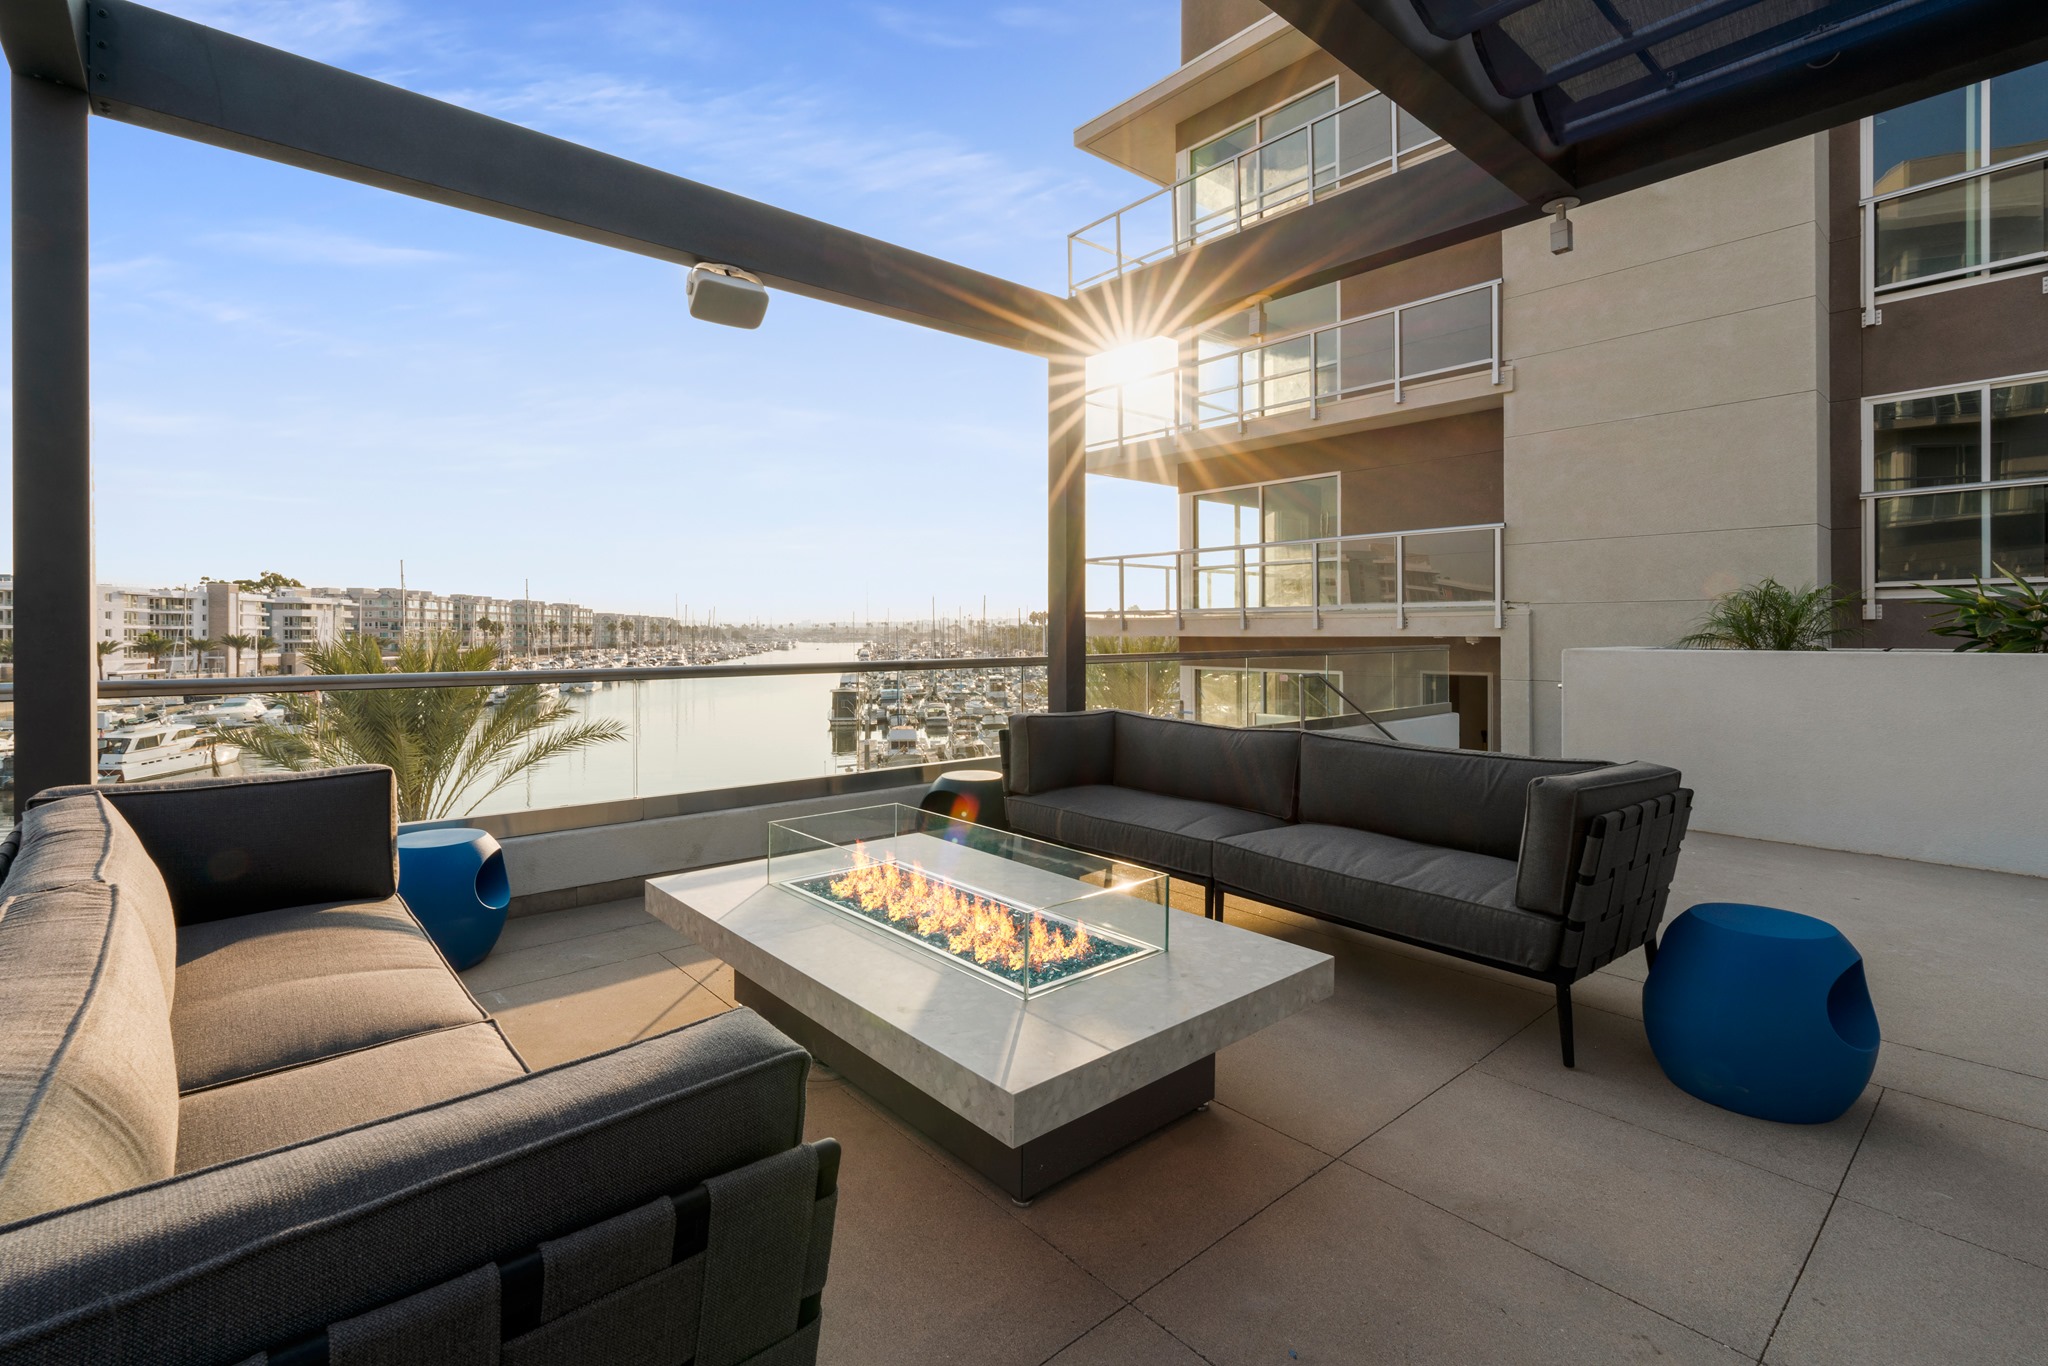 Outdoor fire pit table on Terrace Deck at Courtyard Hotel and Residence Inn Marina del Rey